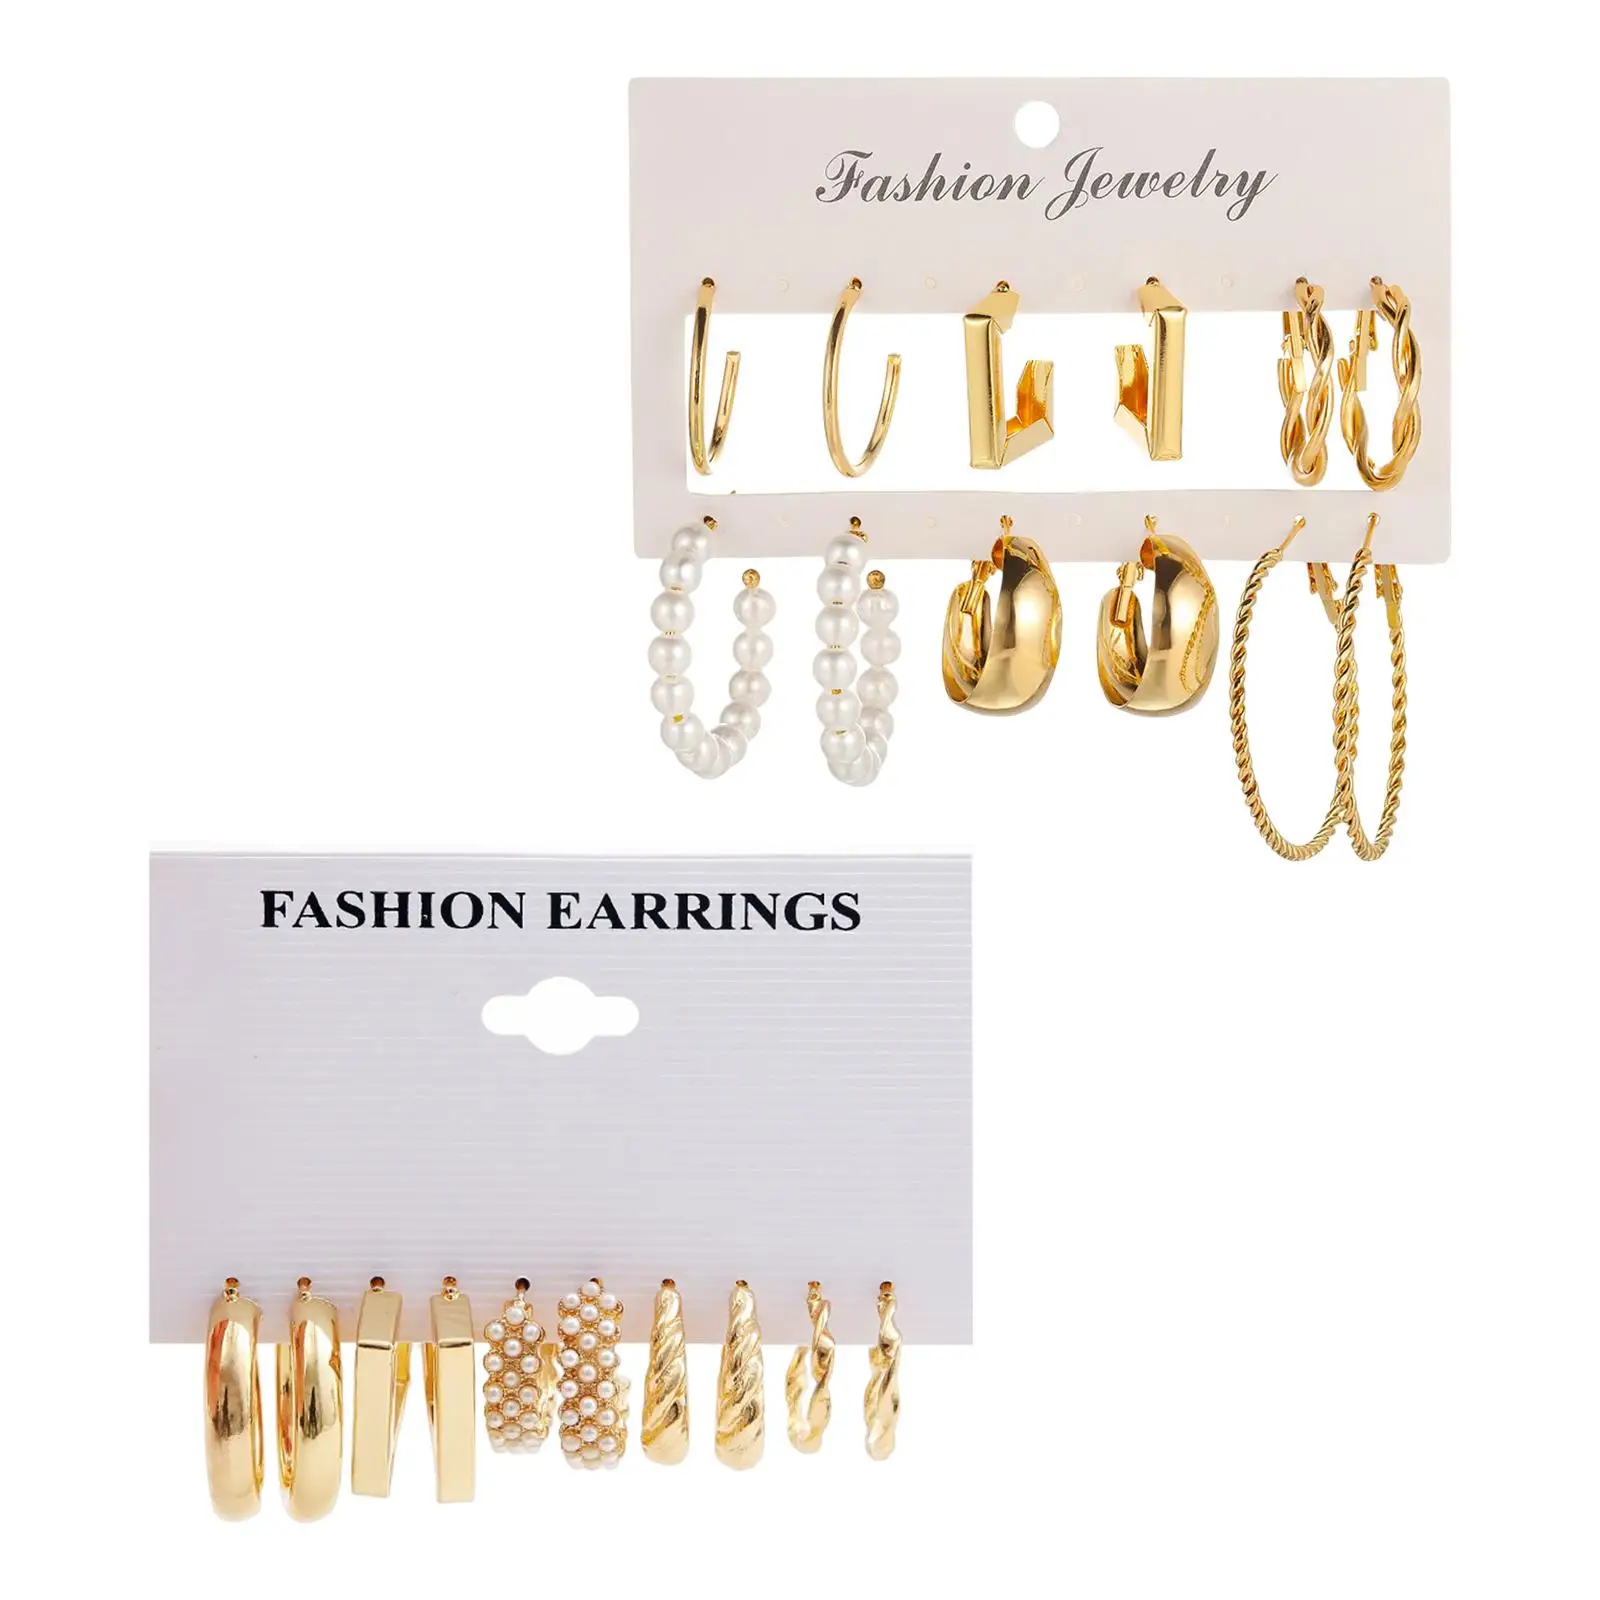 Girls Metal Earrings Set for Receptions, Work Daily wearing Accessory to Every Outfit Party Jewelry Stylish Different Styles